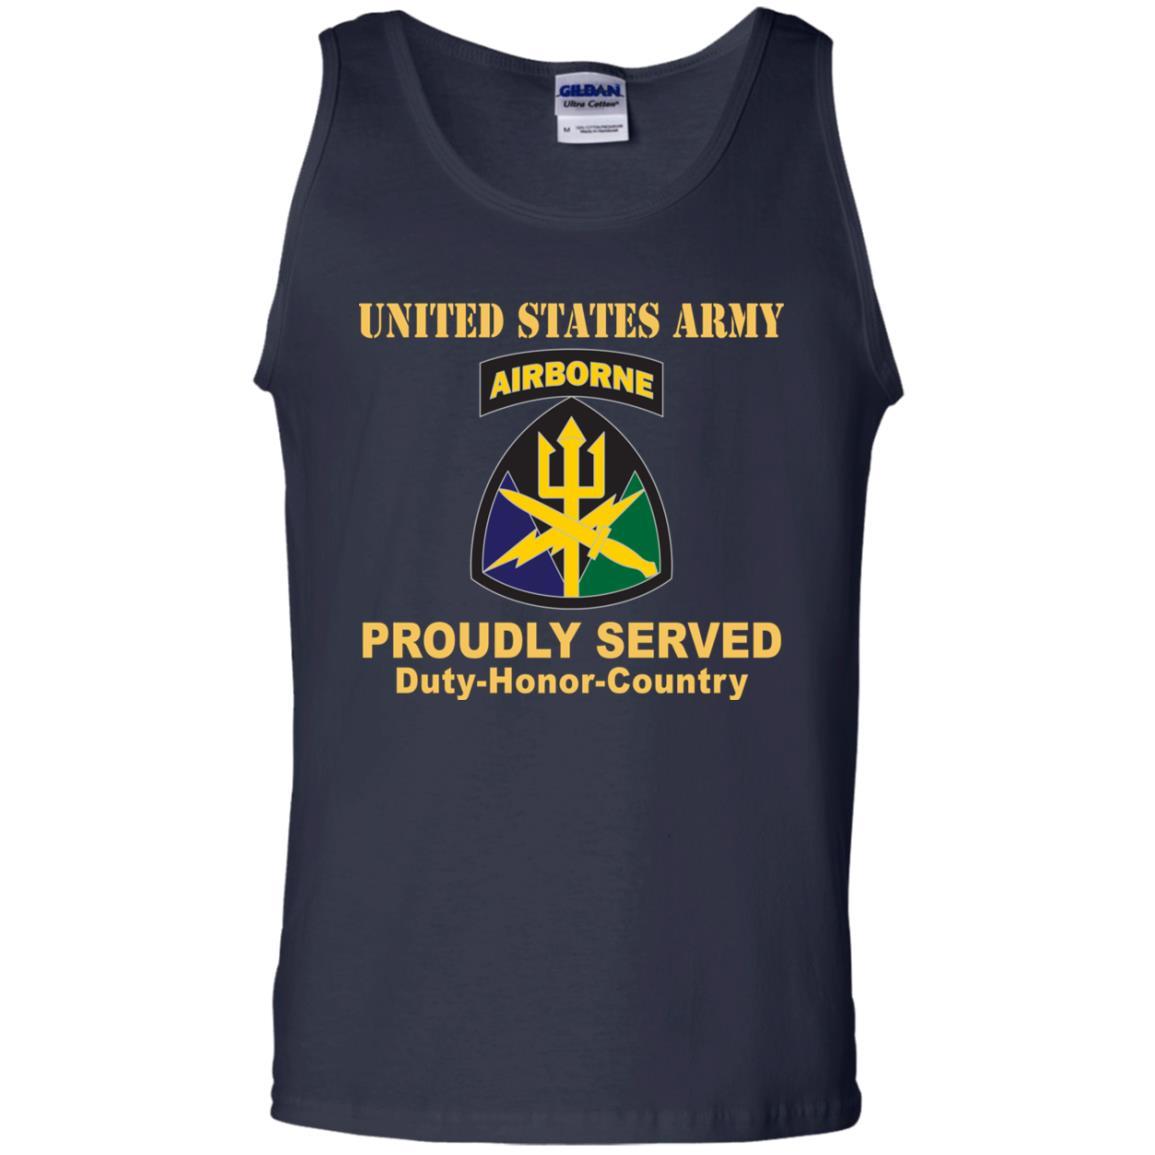 US ARMY SPECIAL OPERATIONS COMMAND JOINT FORCES- Proudly Served T-Shirt On Front For Men-TShirt-Army-Veterans Nation